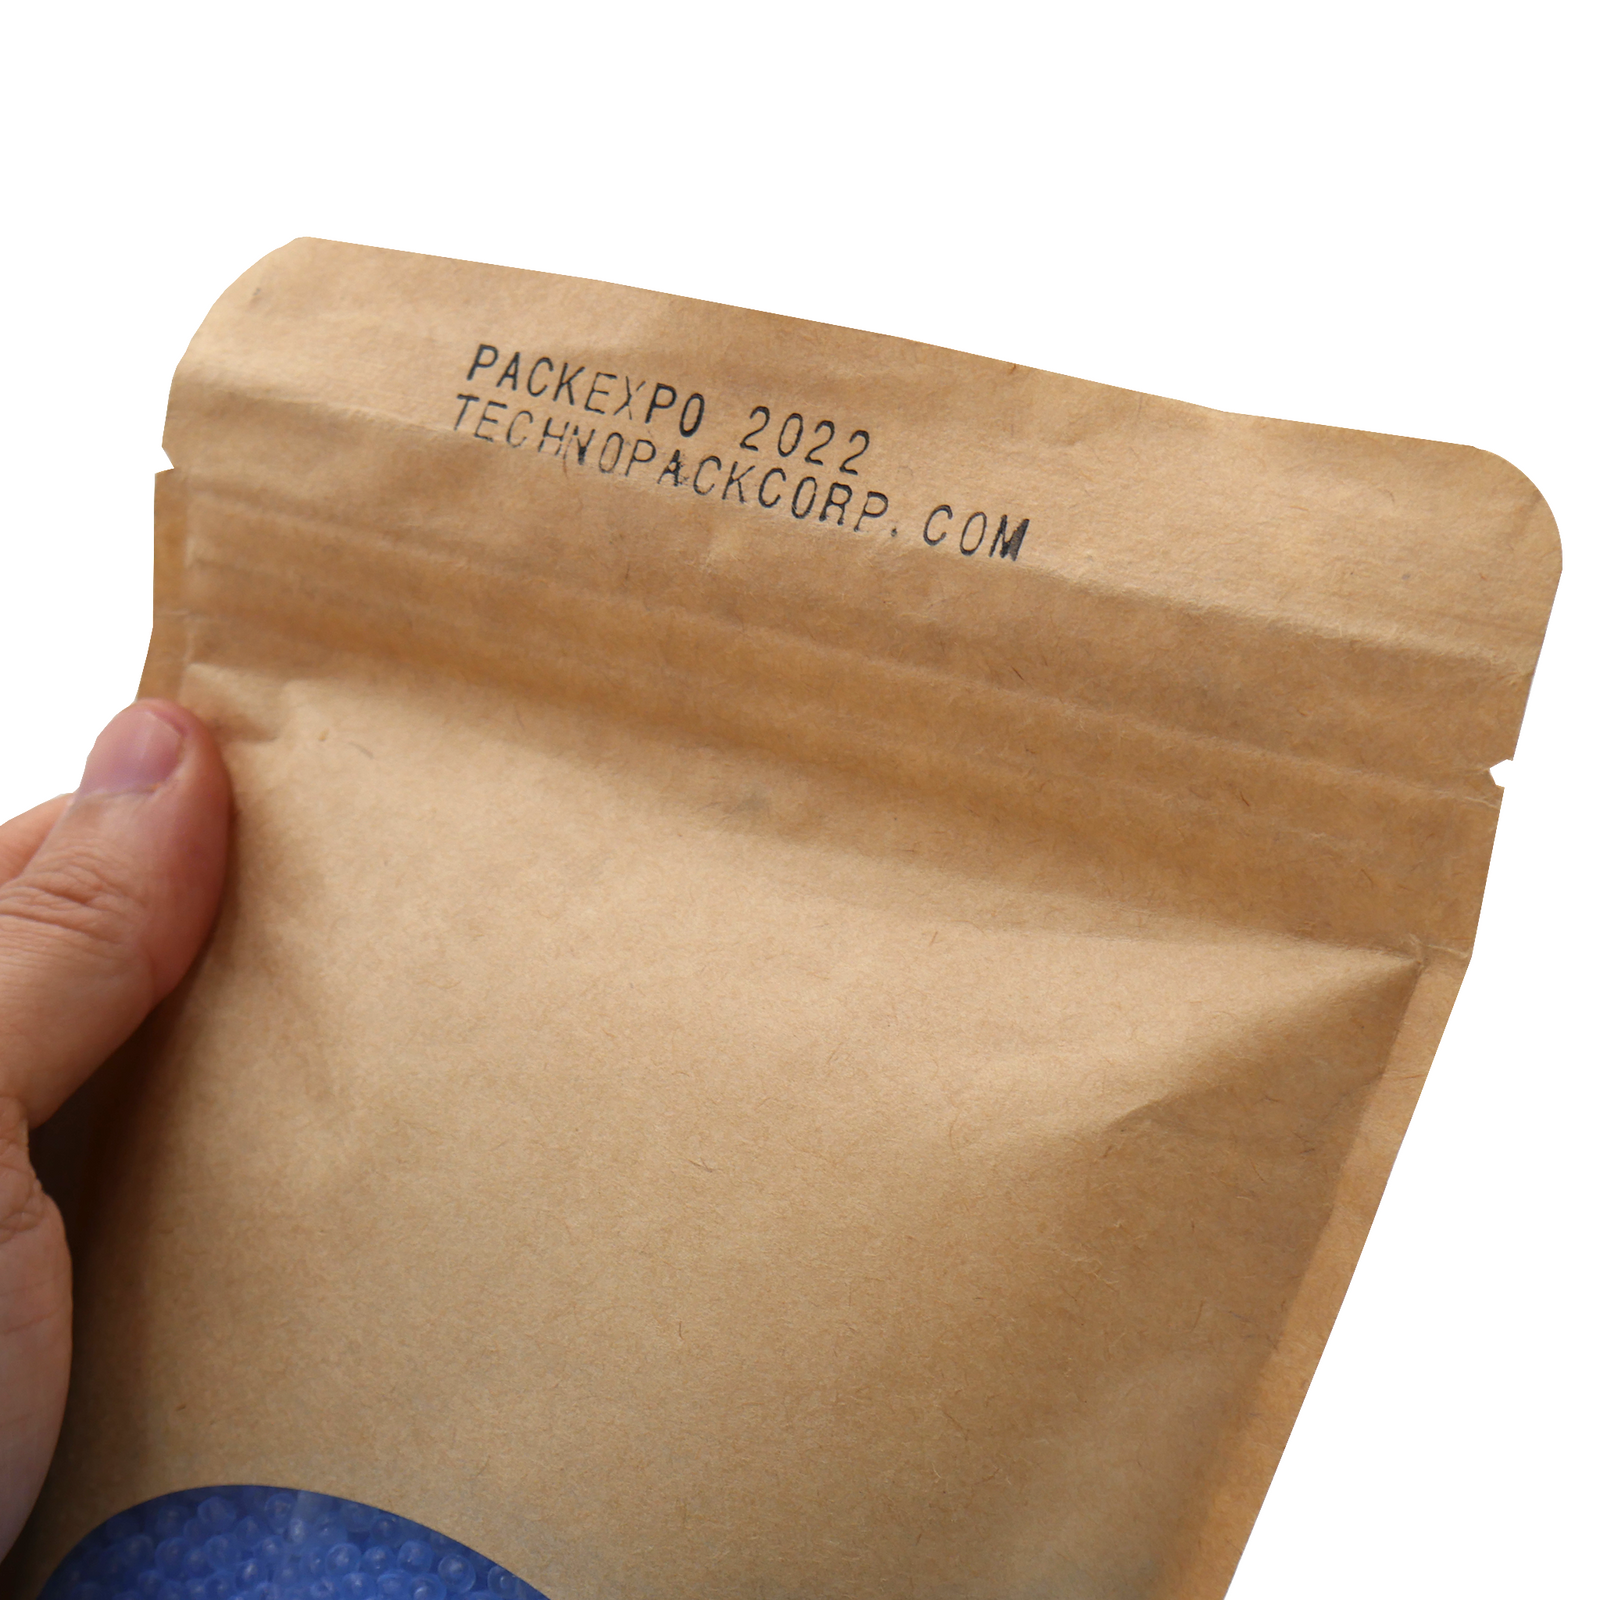 A coded brown bag with black letters and numbers using a JORESTECH continuous band sealer for sealing large bags